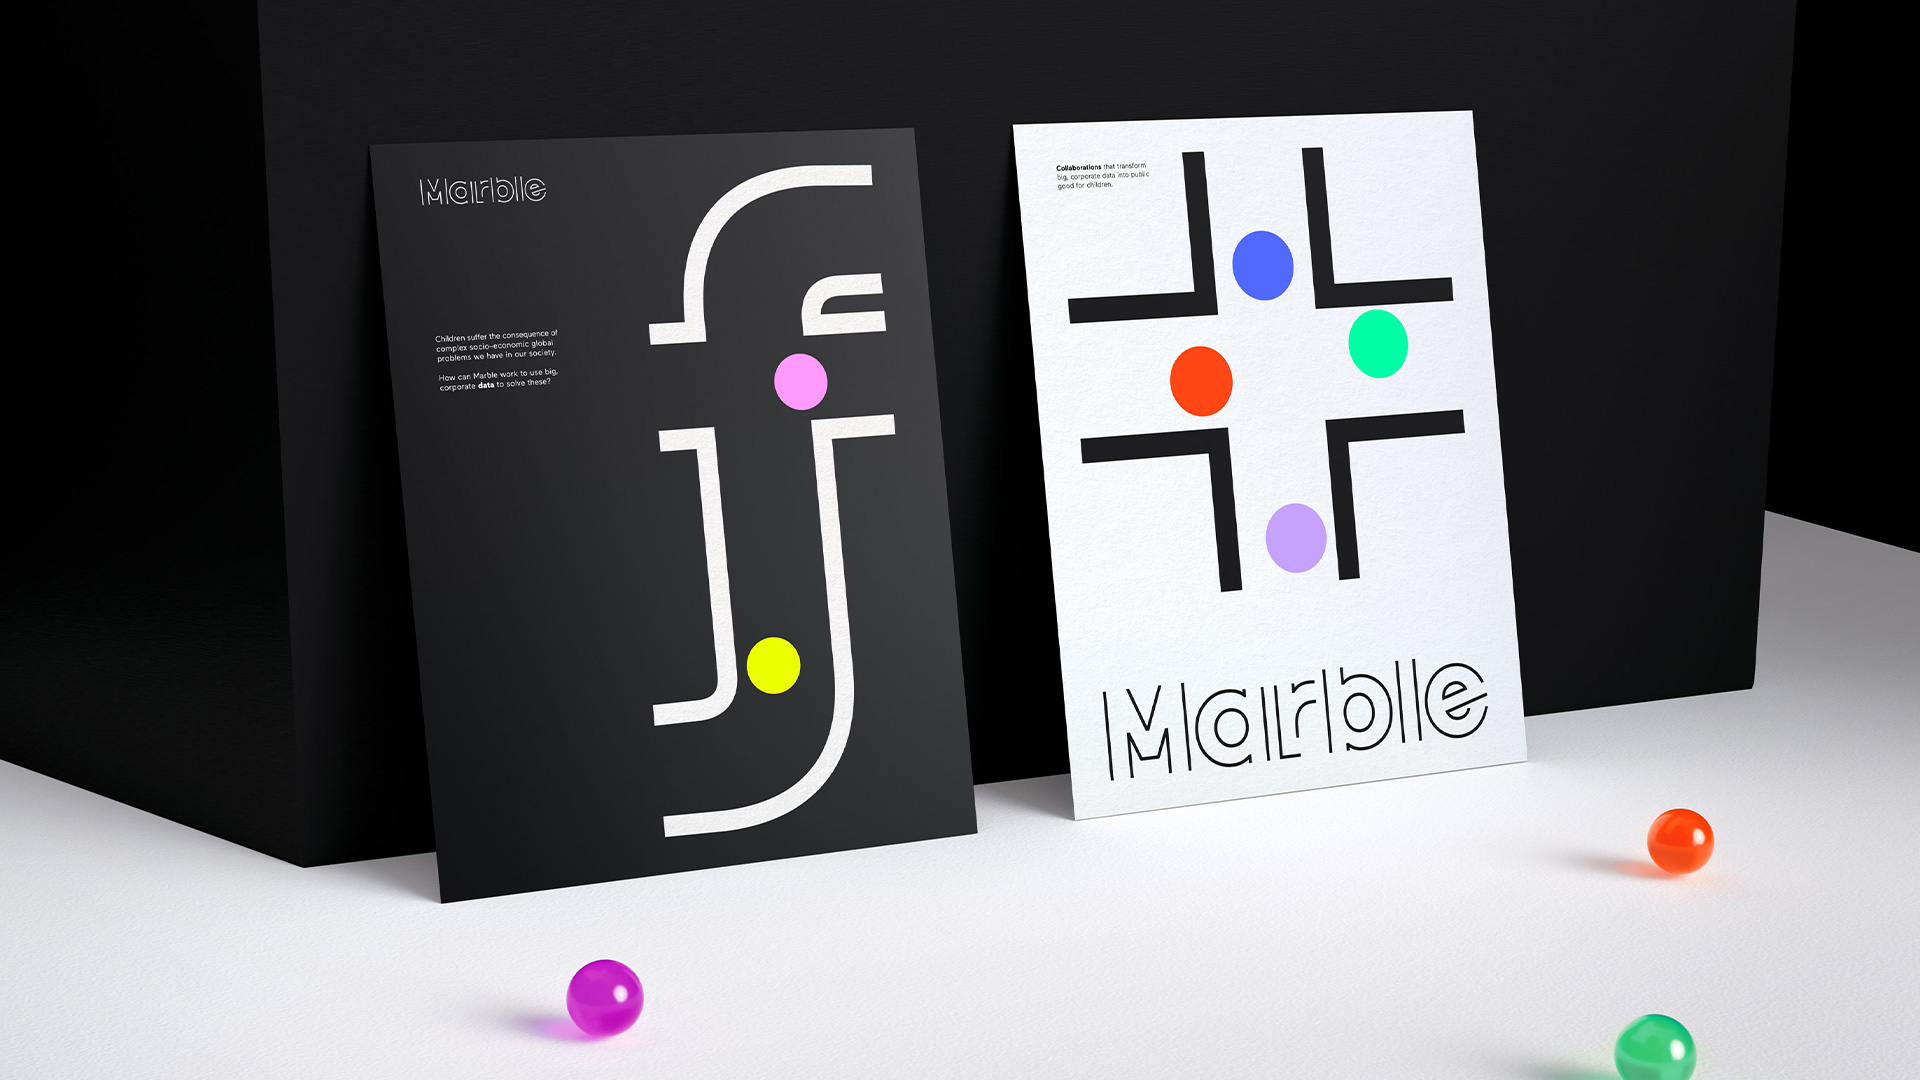 New Name, Logo, and Identity for Marble by Jones Knowles Ritchie